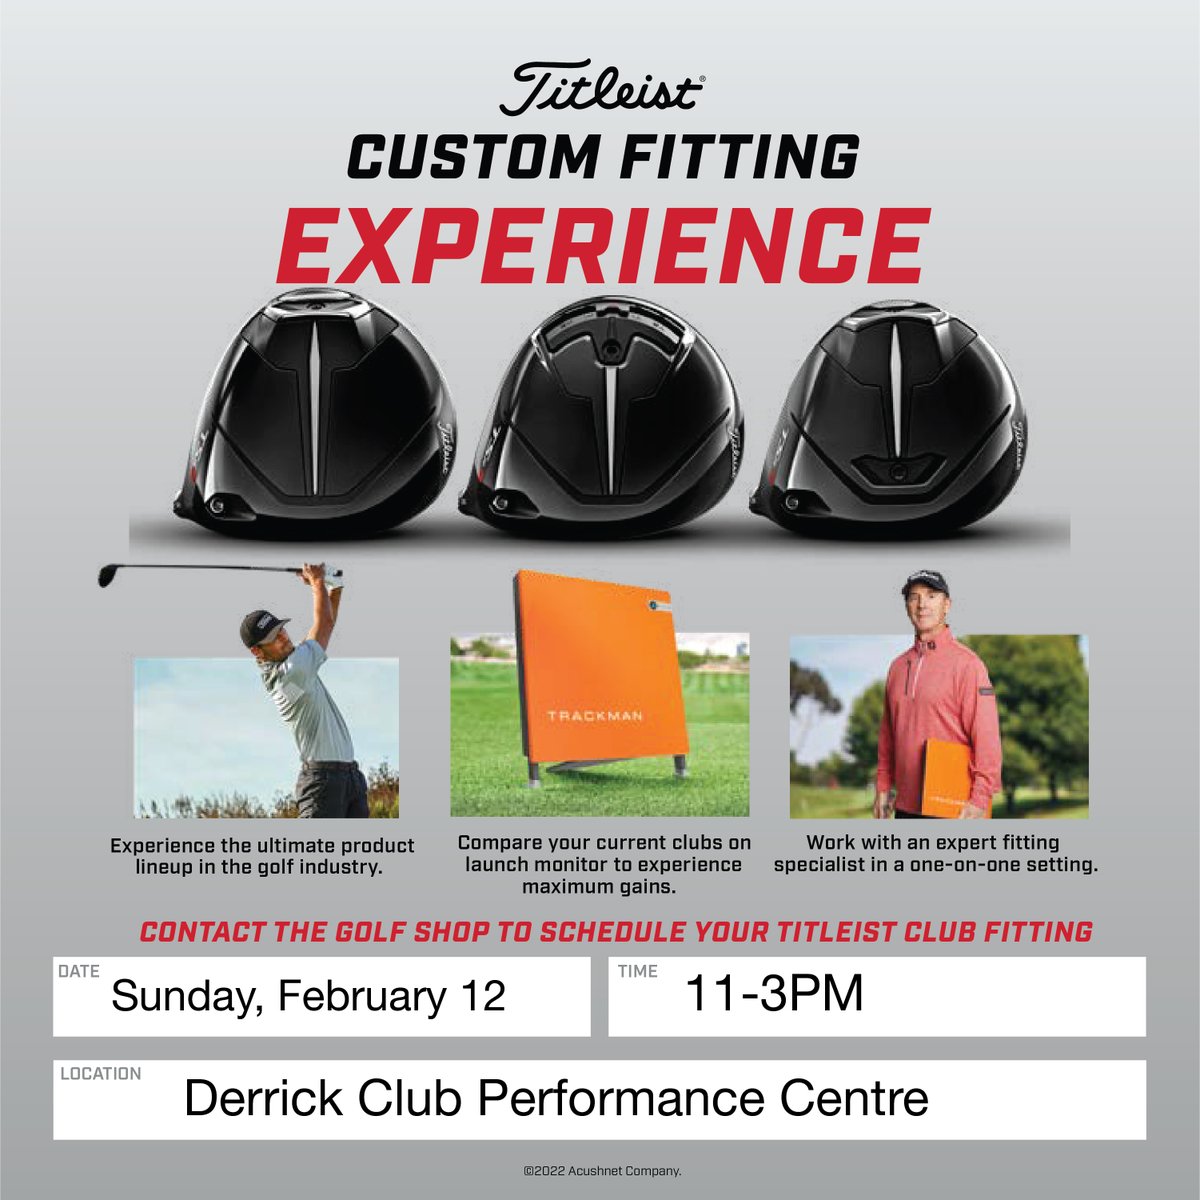 Come to our @titleist fitting day! 🏌️

Sunday, February 12
From 11:00 AM - 3:00 PM

Contact the Pro Shop at 780.437.8383 to book your fitting!

#ProShop #ClubFitting #Titleist #FittingDay #Golf #YEGgolf #YEG